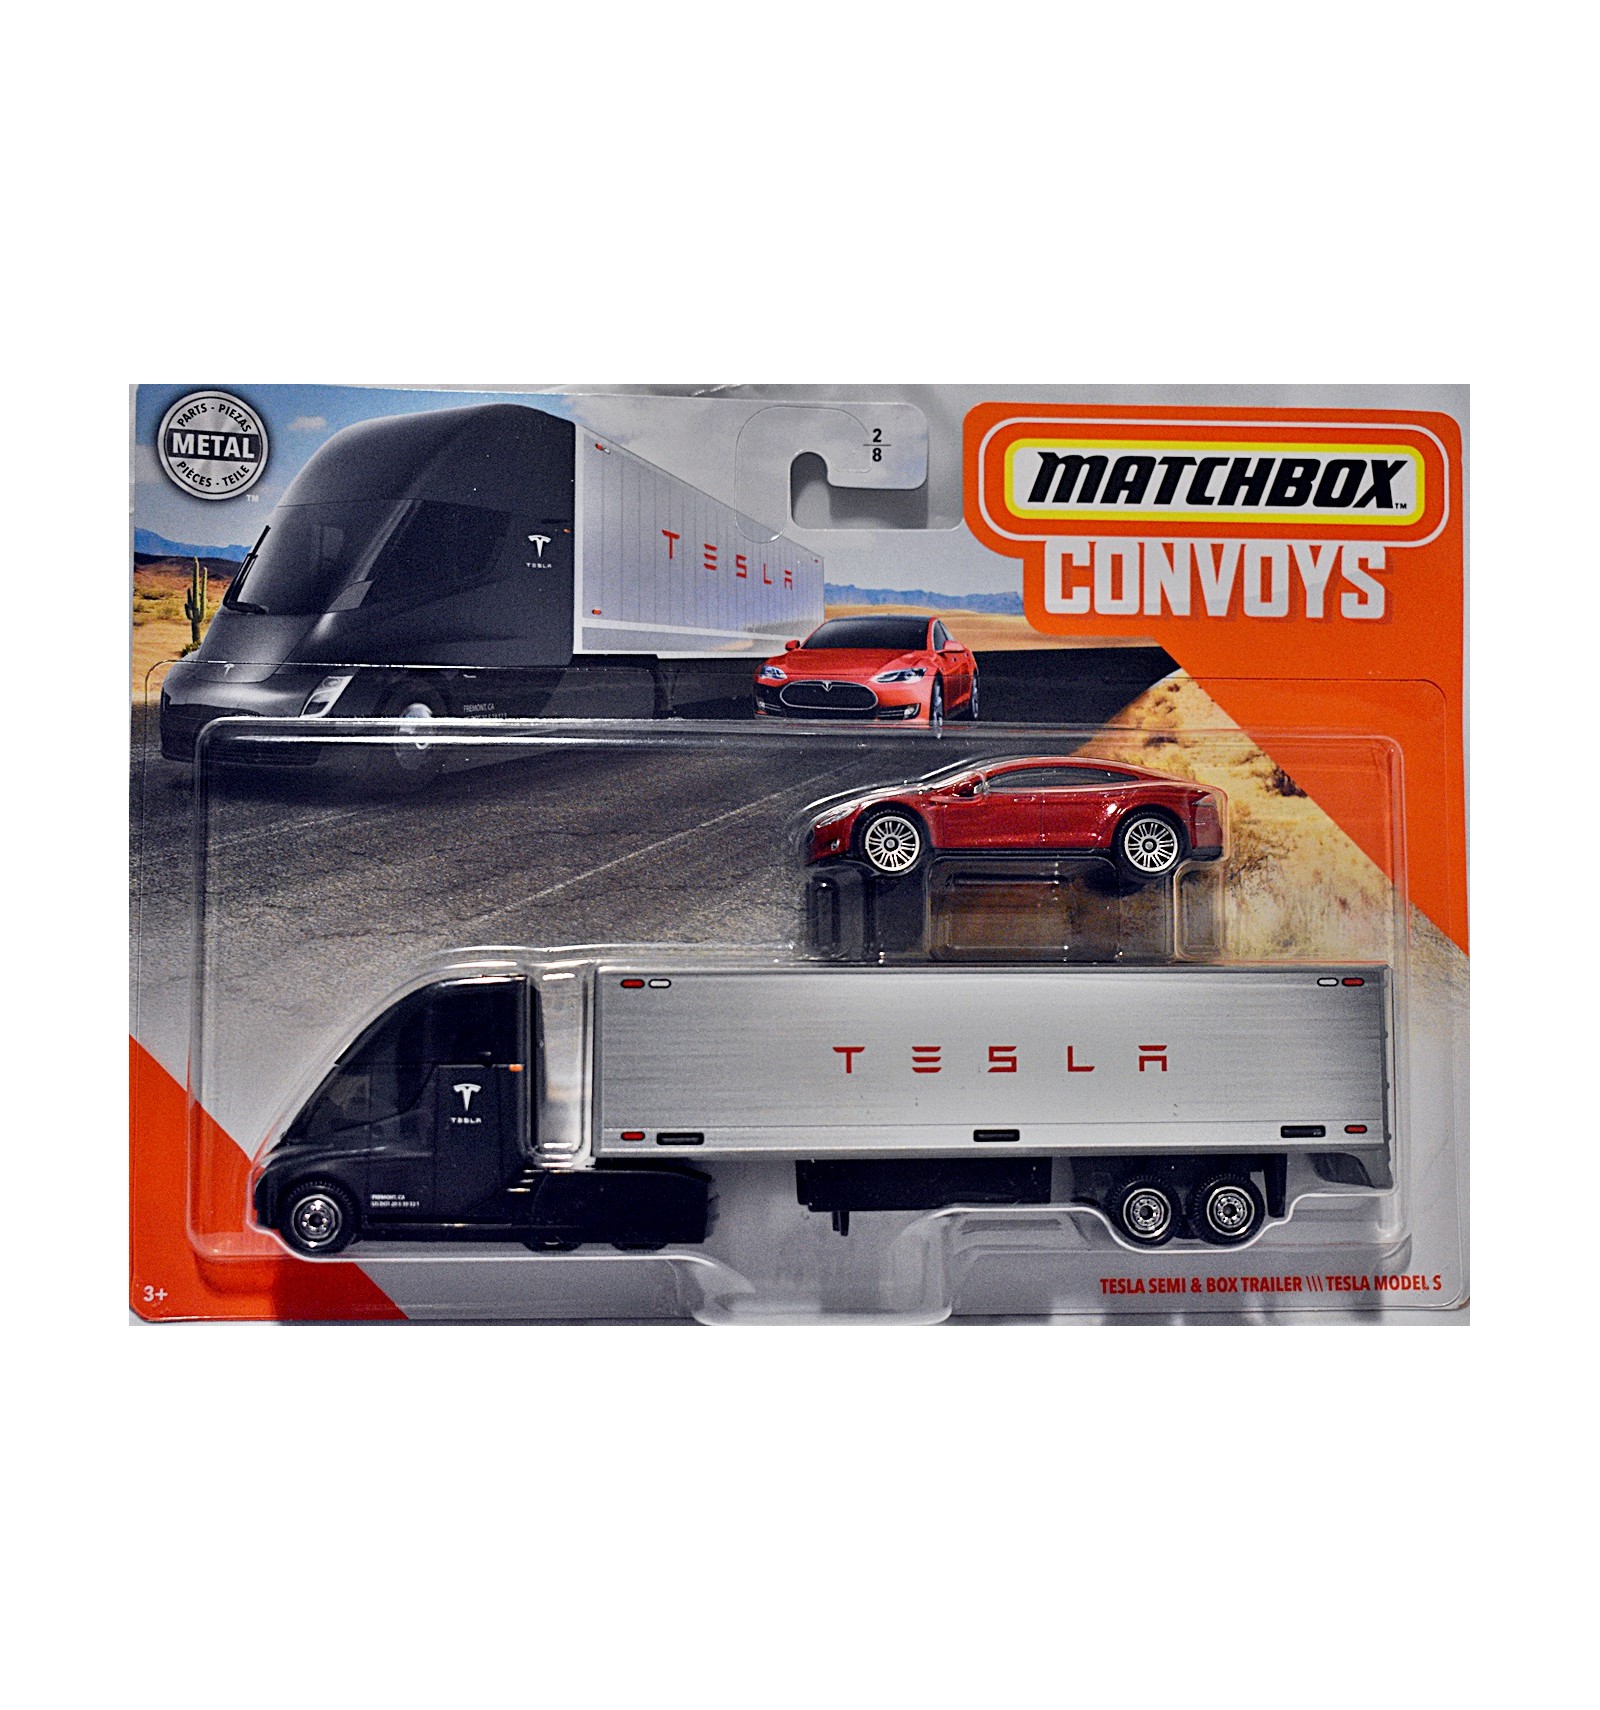 Matchbox Convoys Series Box Trailer with Model S Tesla for sale online 